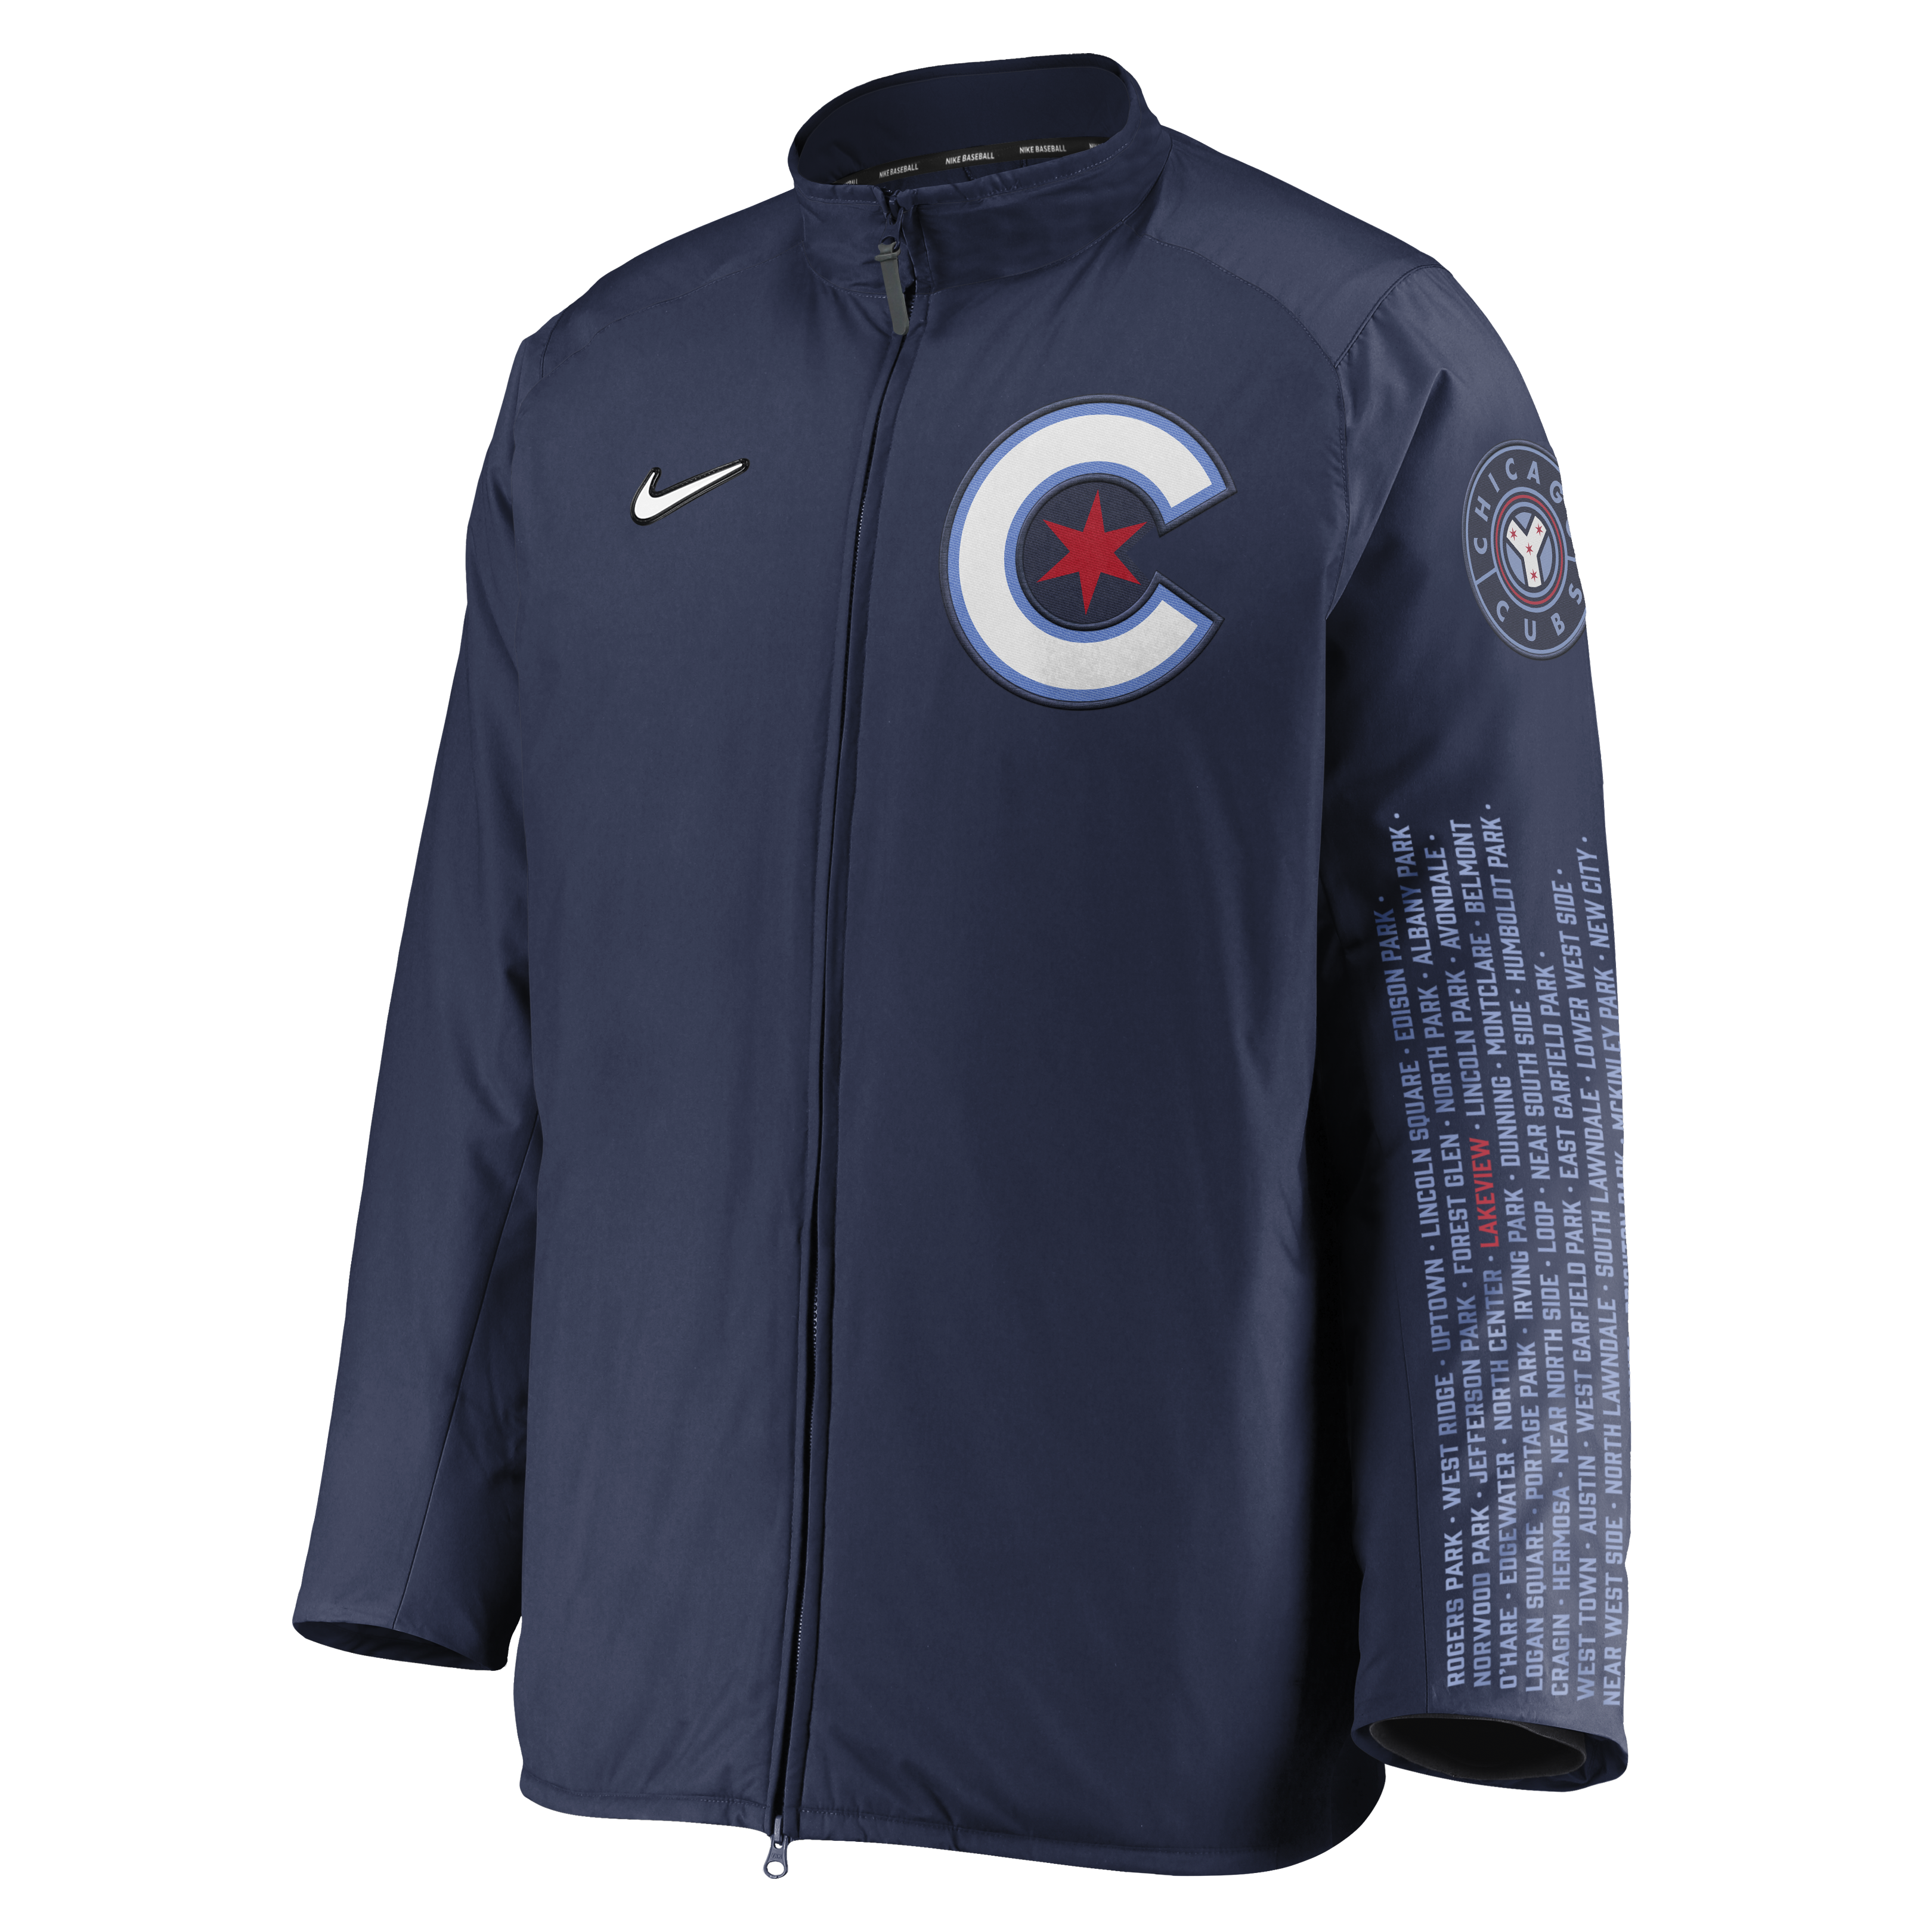 The Nike Chicago Cubs City Connect Collection – Ivy Shop